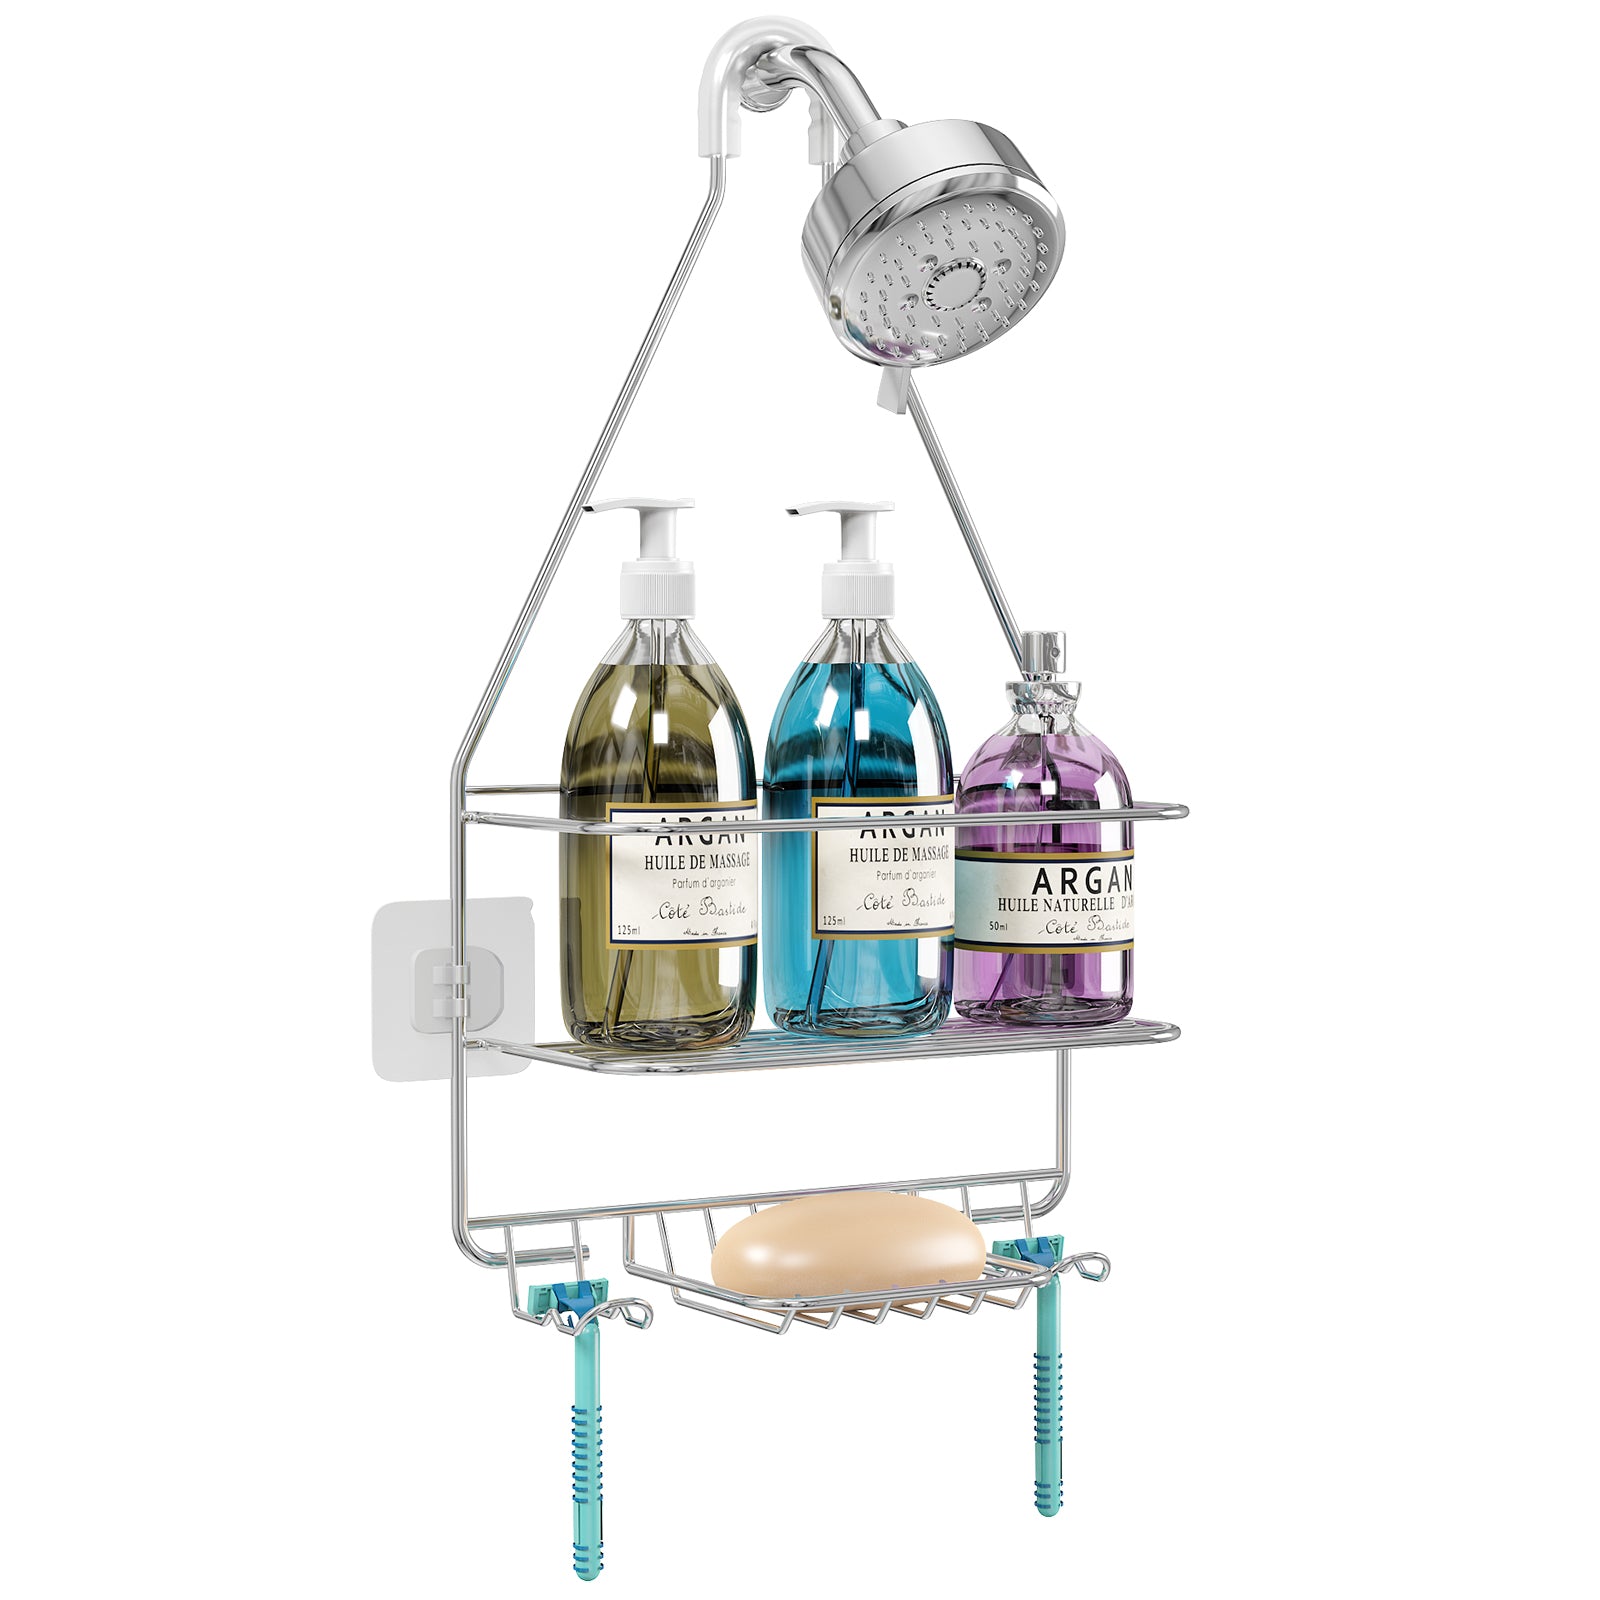 Wall Mount Rust Resistant Shower Caddy Shelf Organizer Rack in Silver (2  Pack)